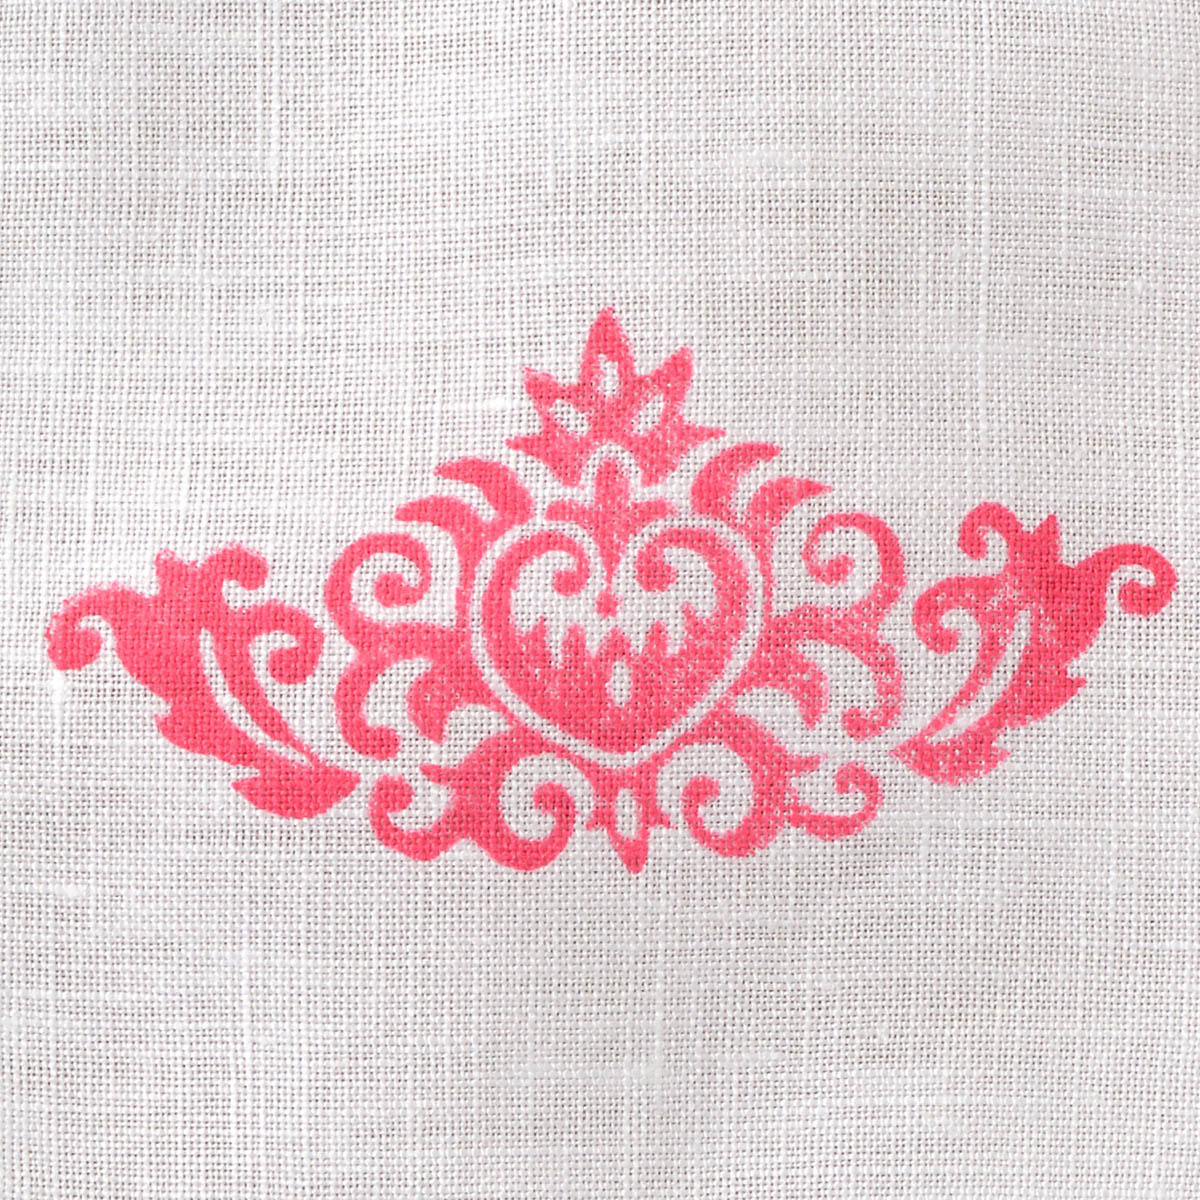 Fabric Creations™ Block Printing Stamps - Border - Baroque